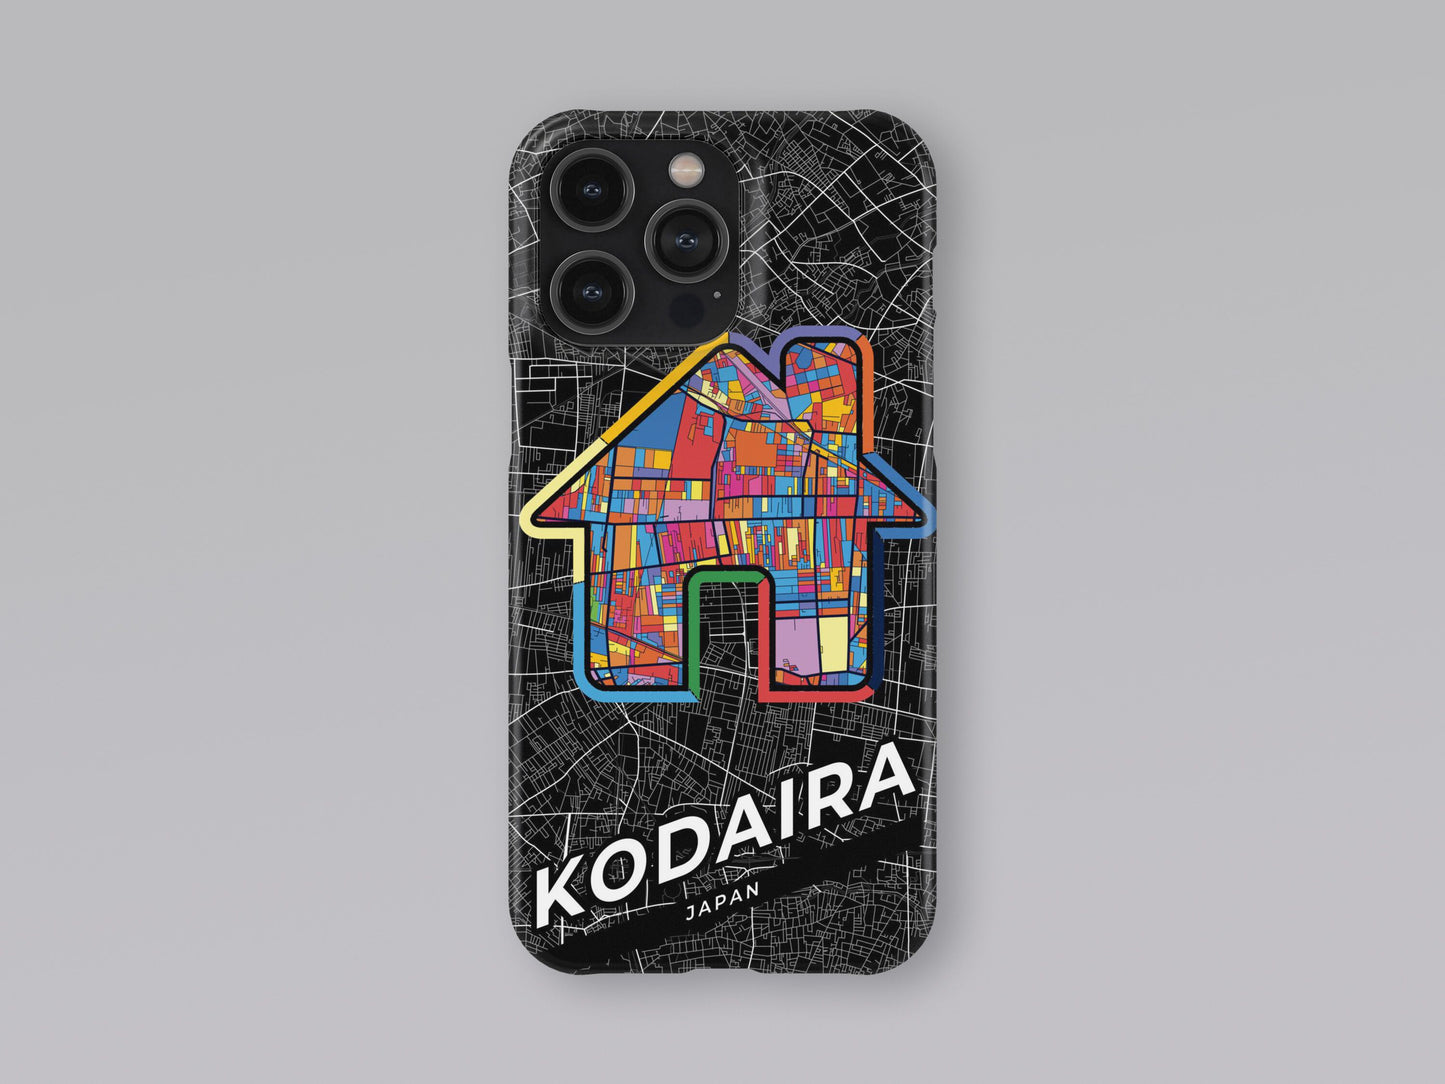 Kodaira Japan slim phone case with colorful icon. Birthday, wedding or housewarming gift. Couple match cases. 3